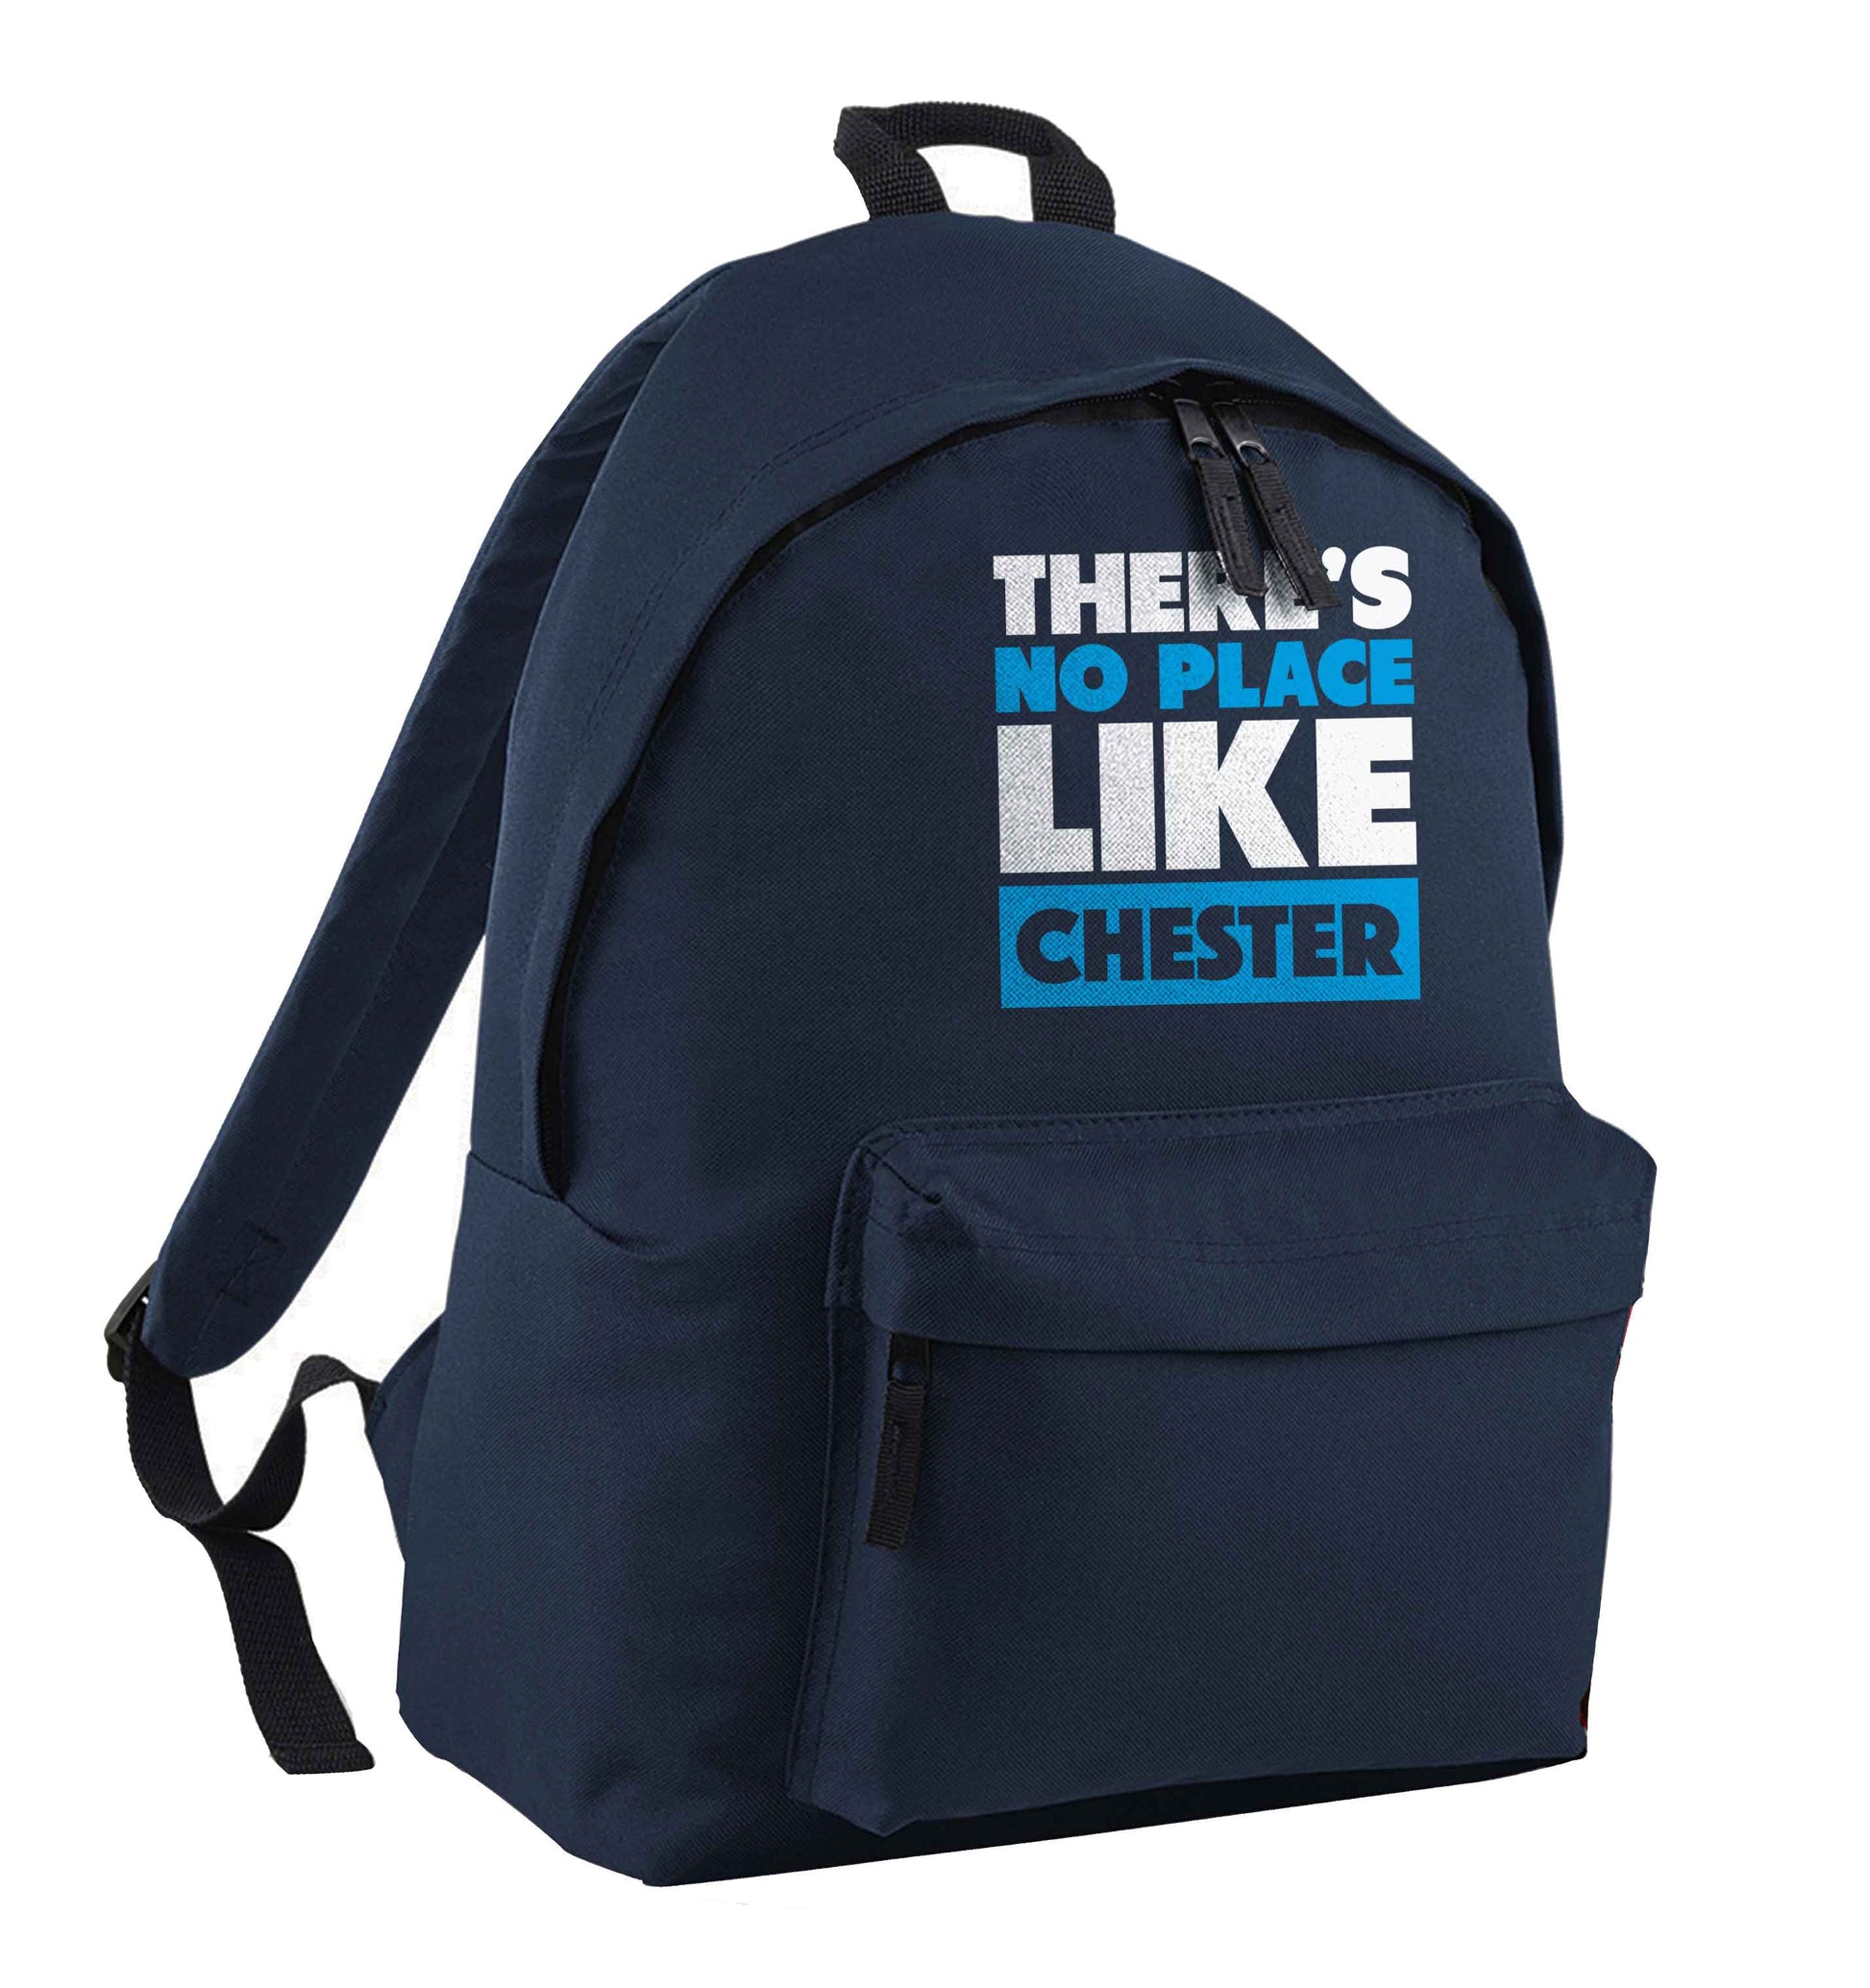 There's no place like Chester navy adults backpack